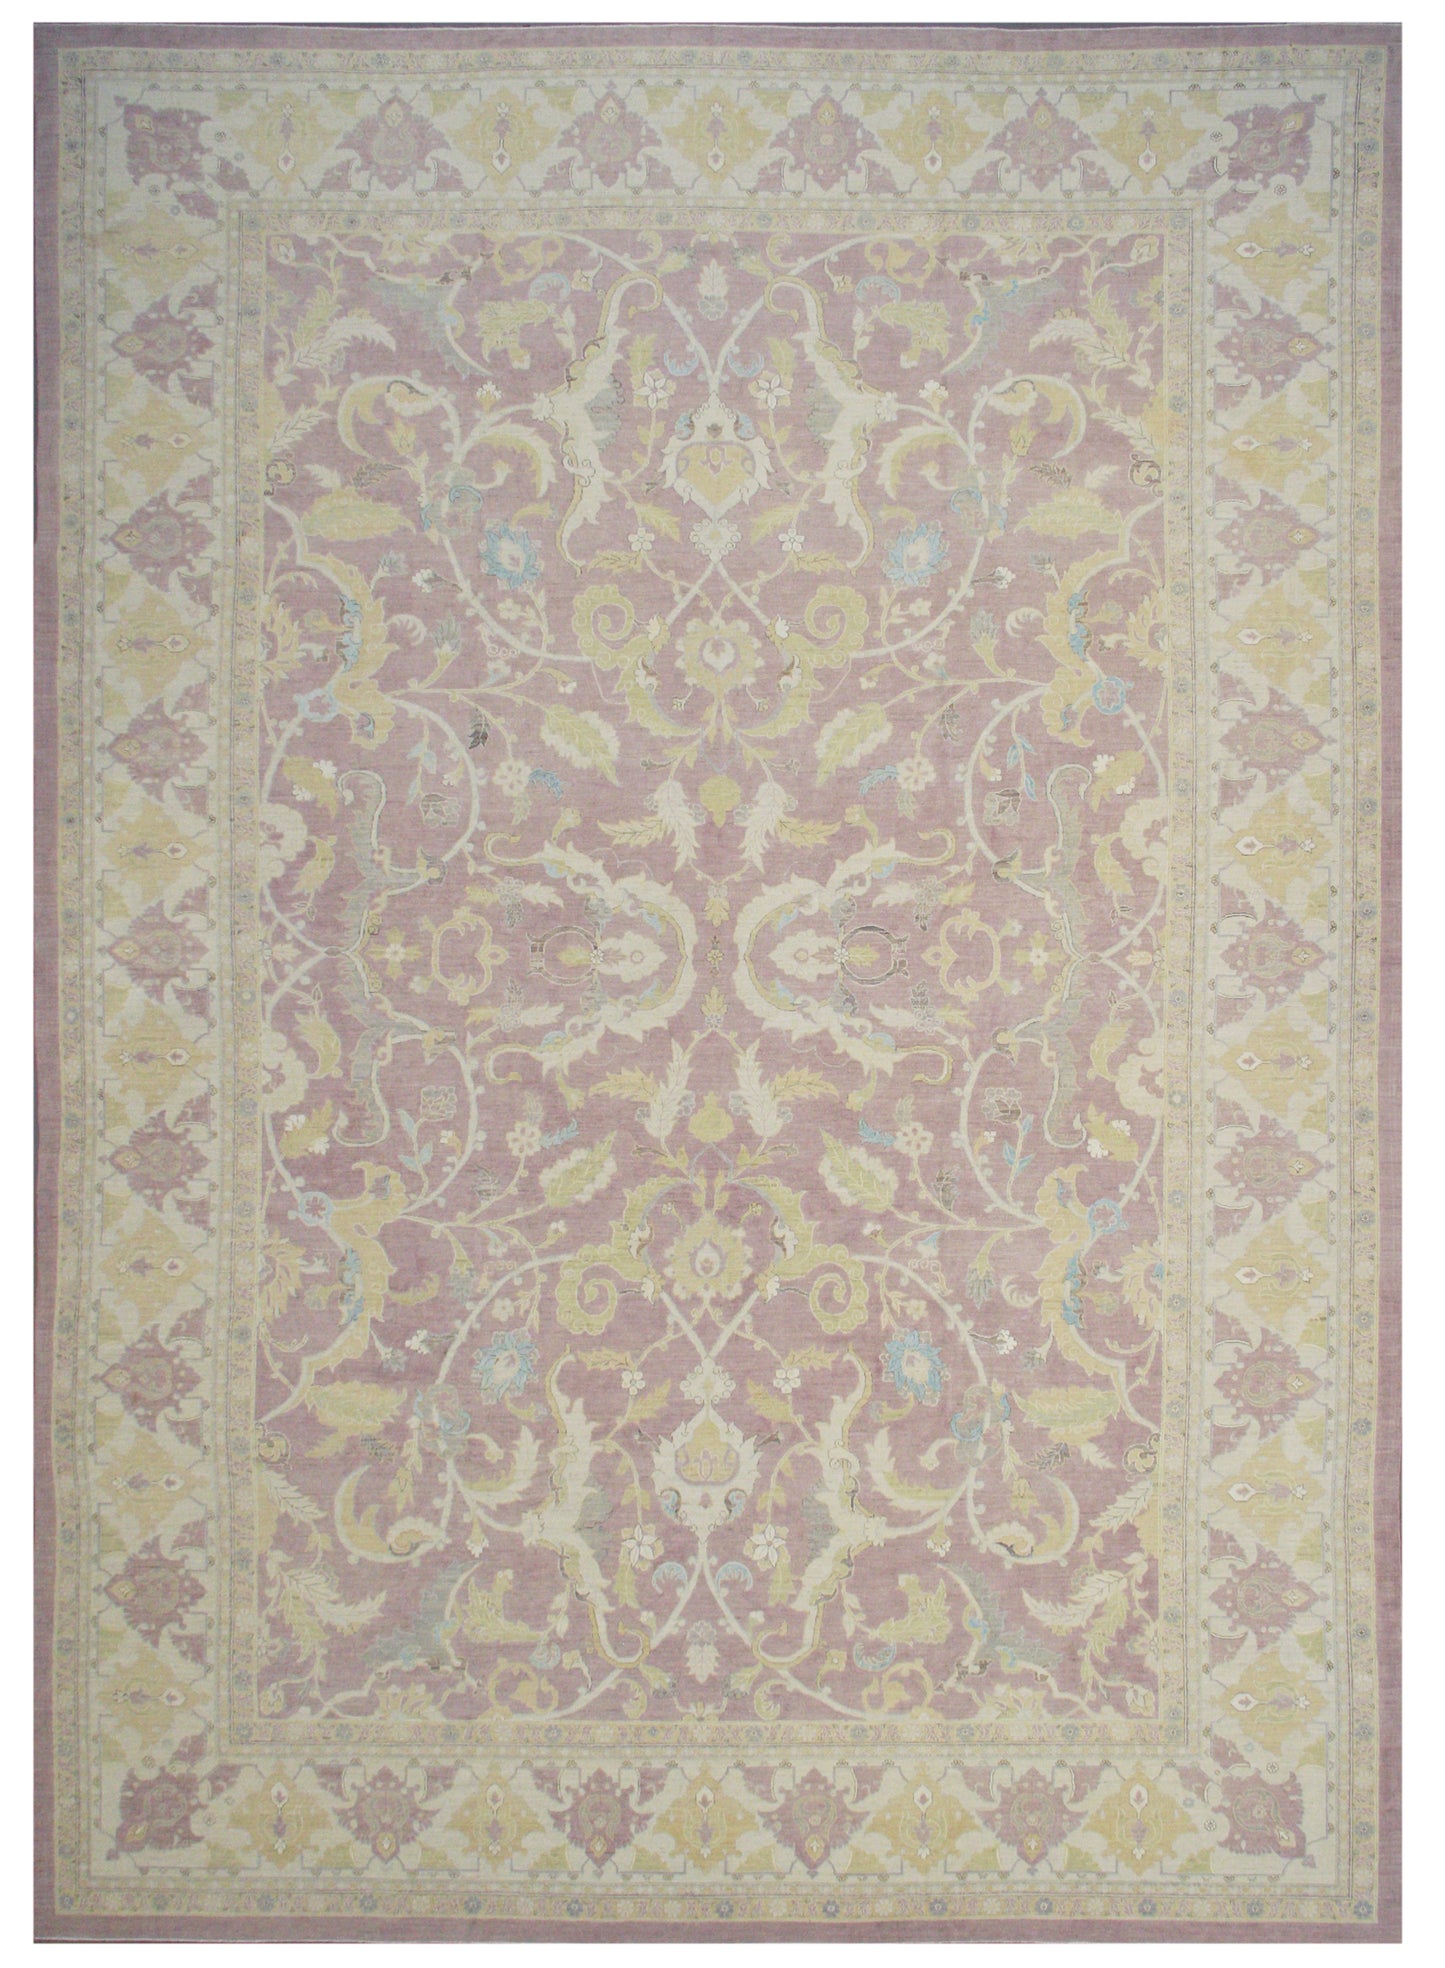 14x20 Fine Quality Large Polonaise Design Silk and Wool Ariana Luxury Rug